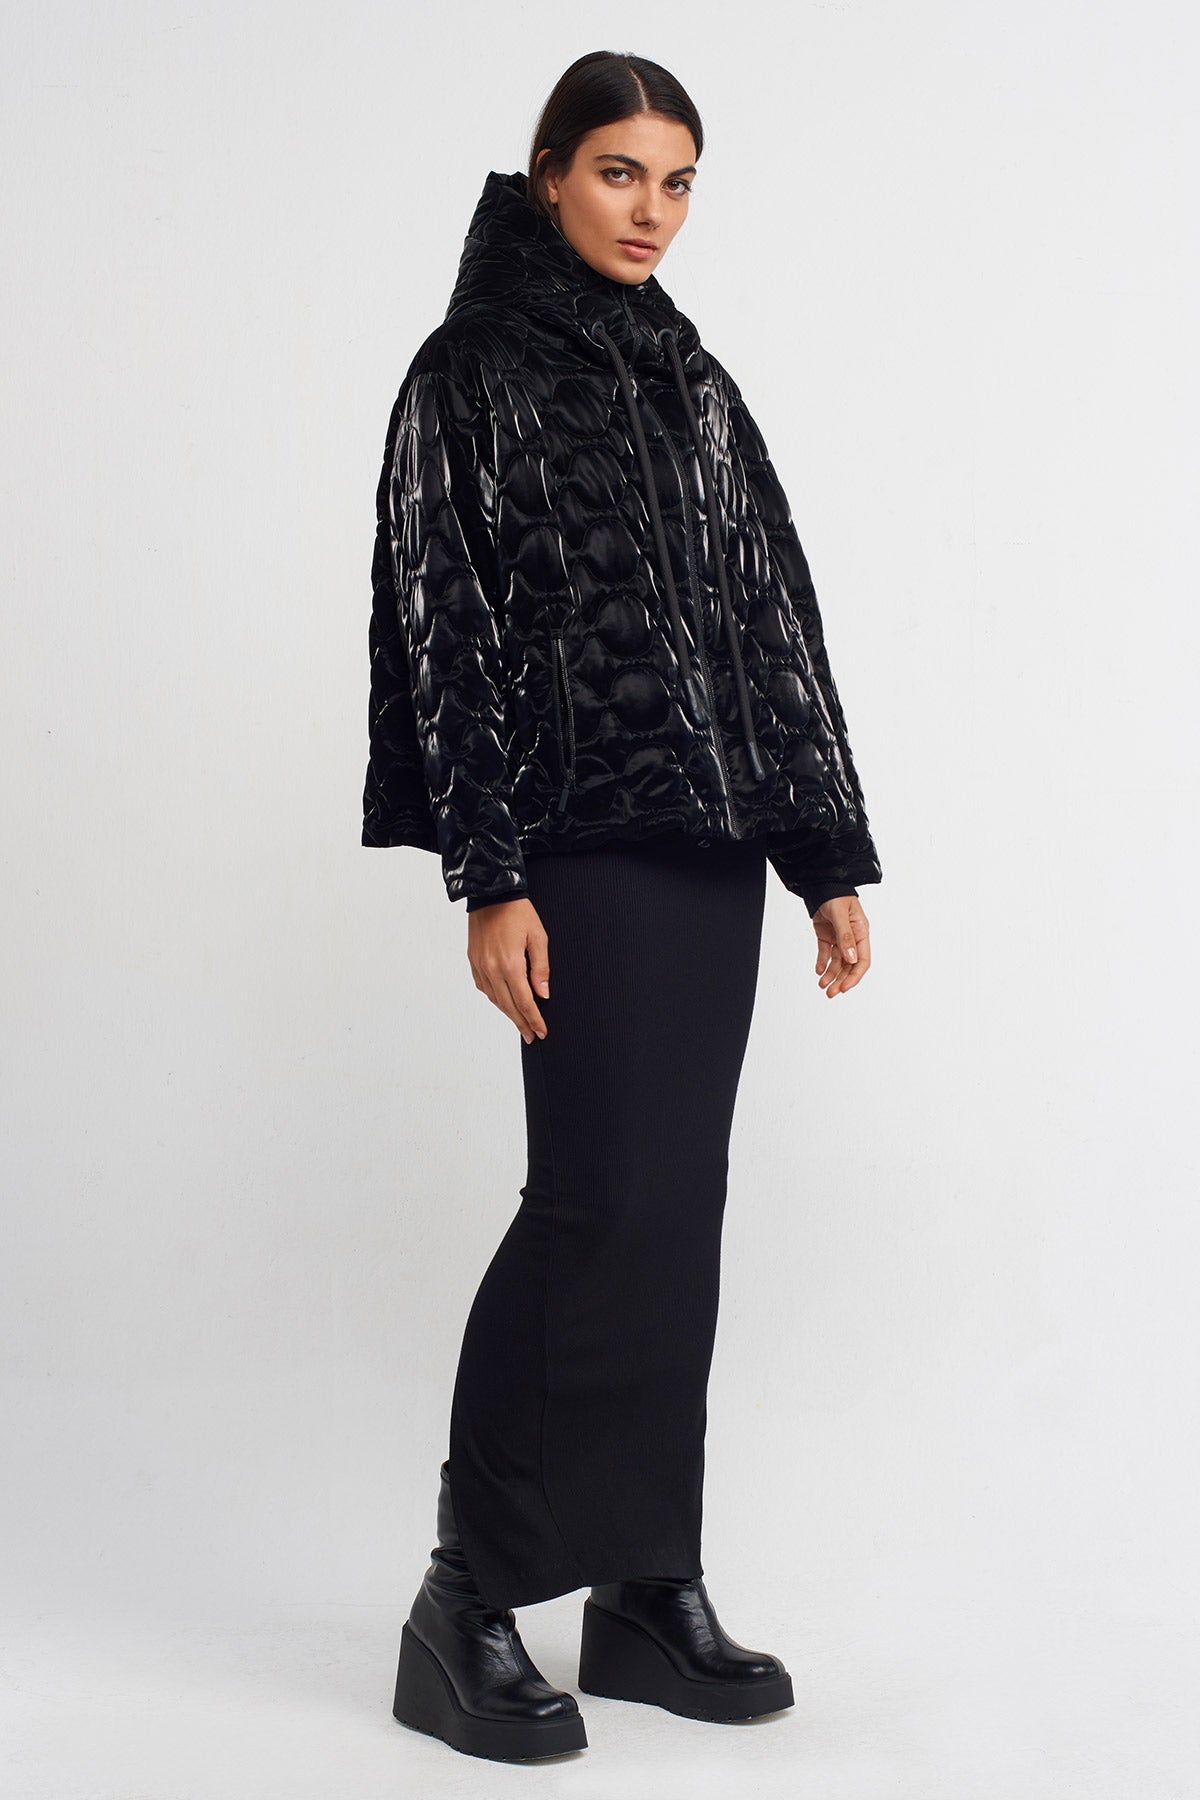 Black Shiny Quilted Puffer Coat-K235015122